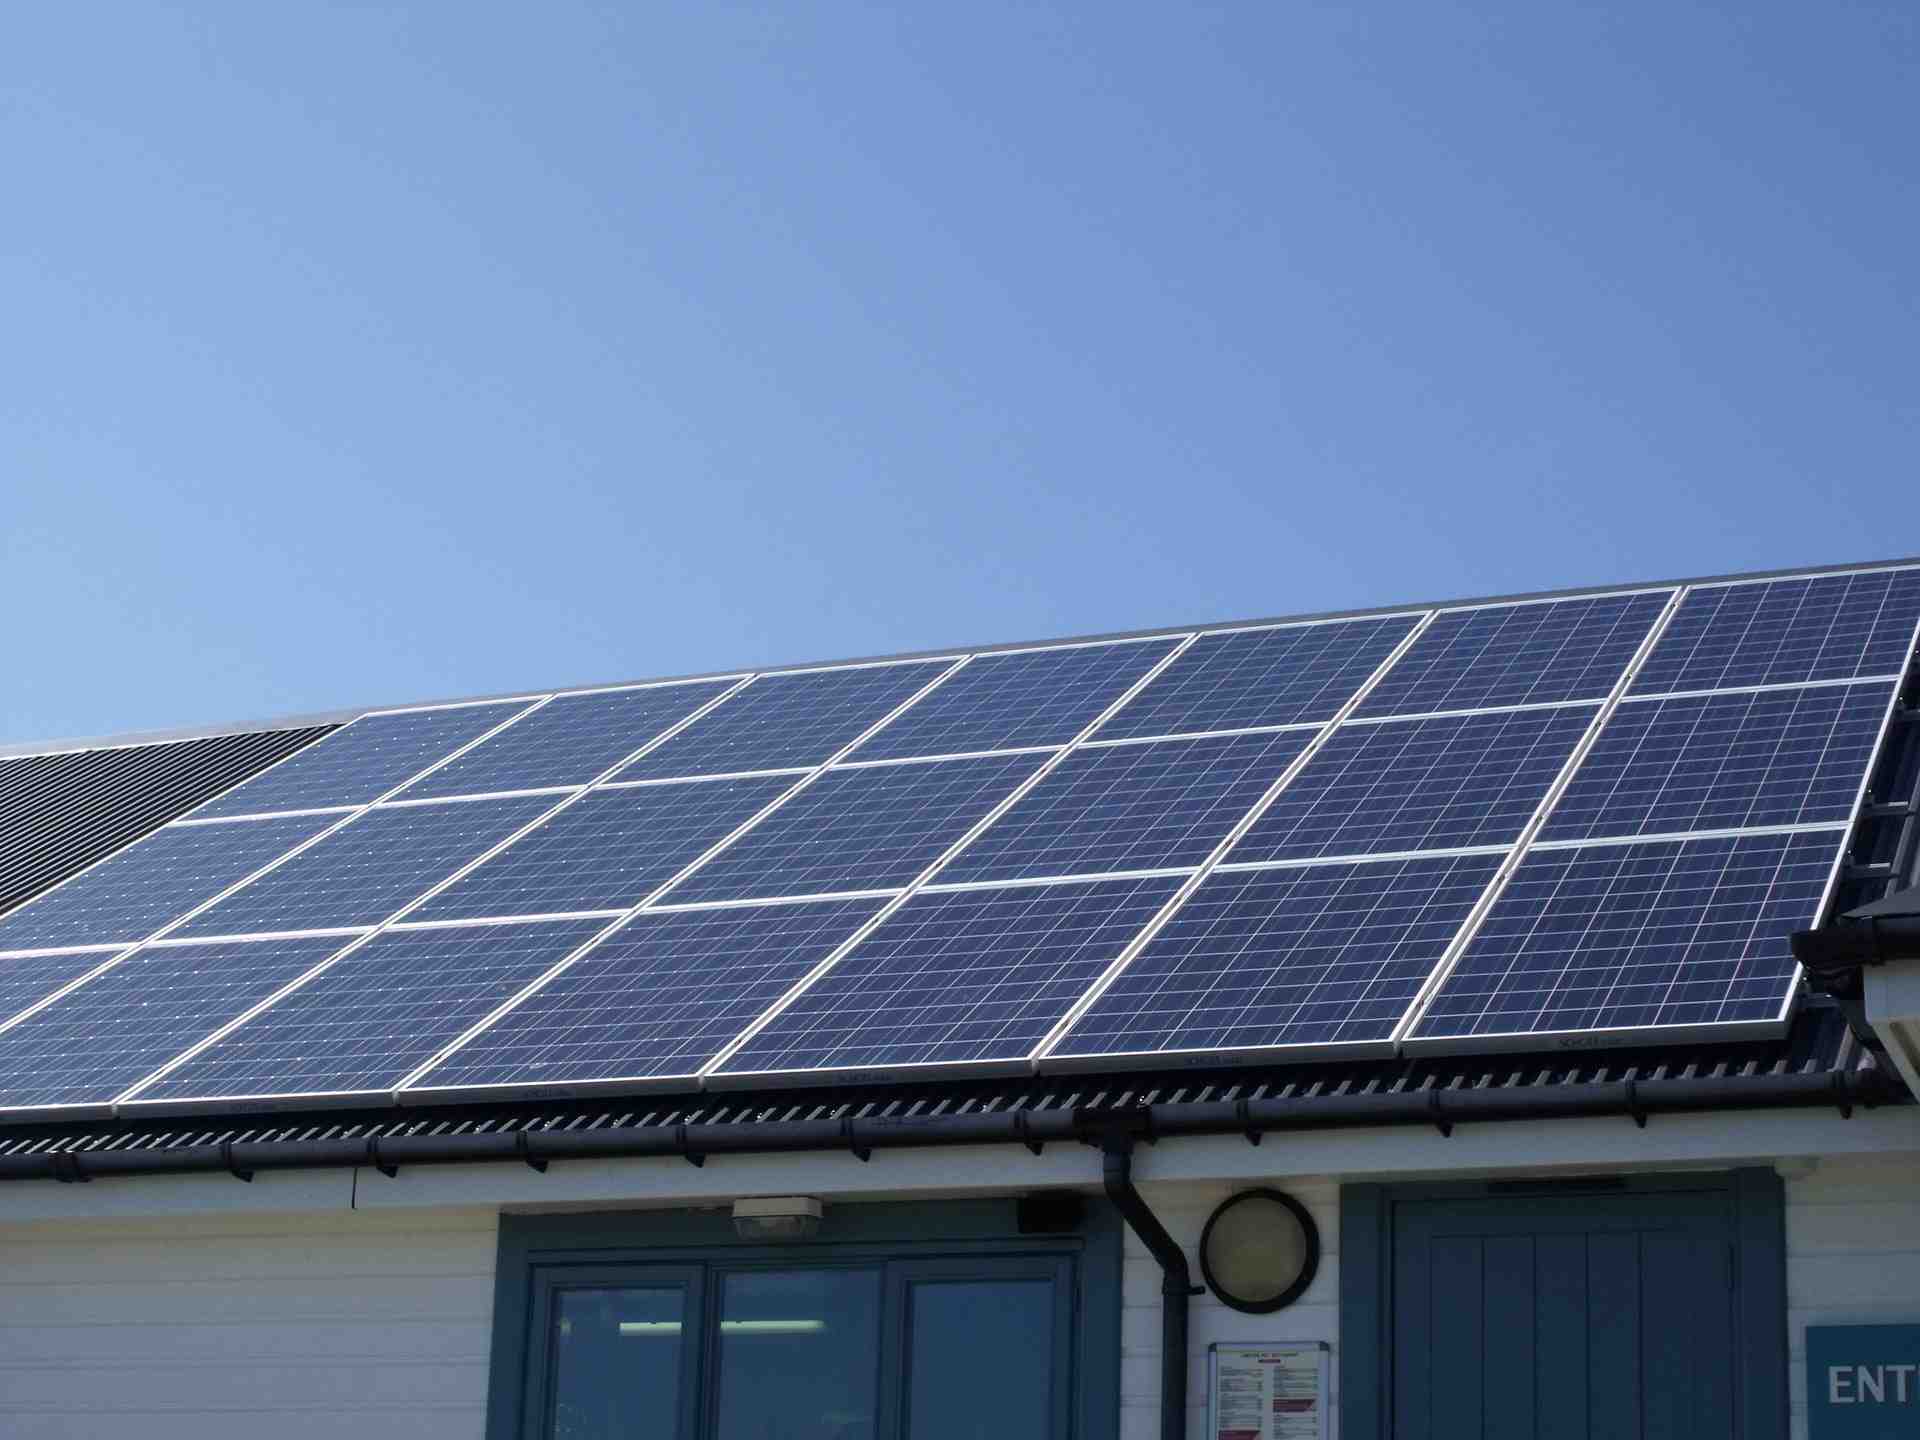 What is the catch with going solar?